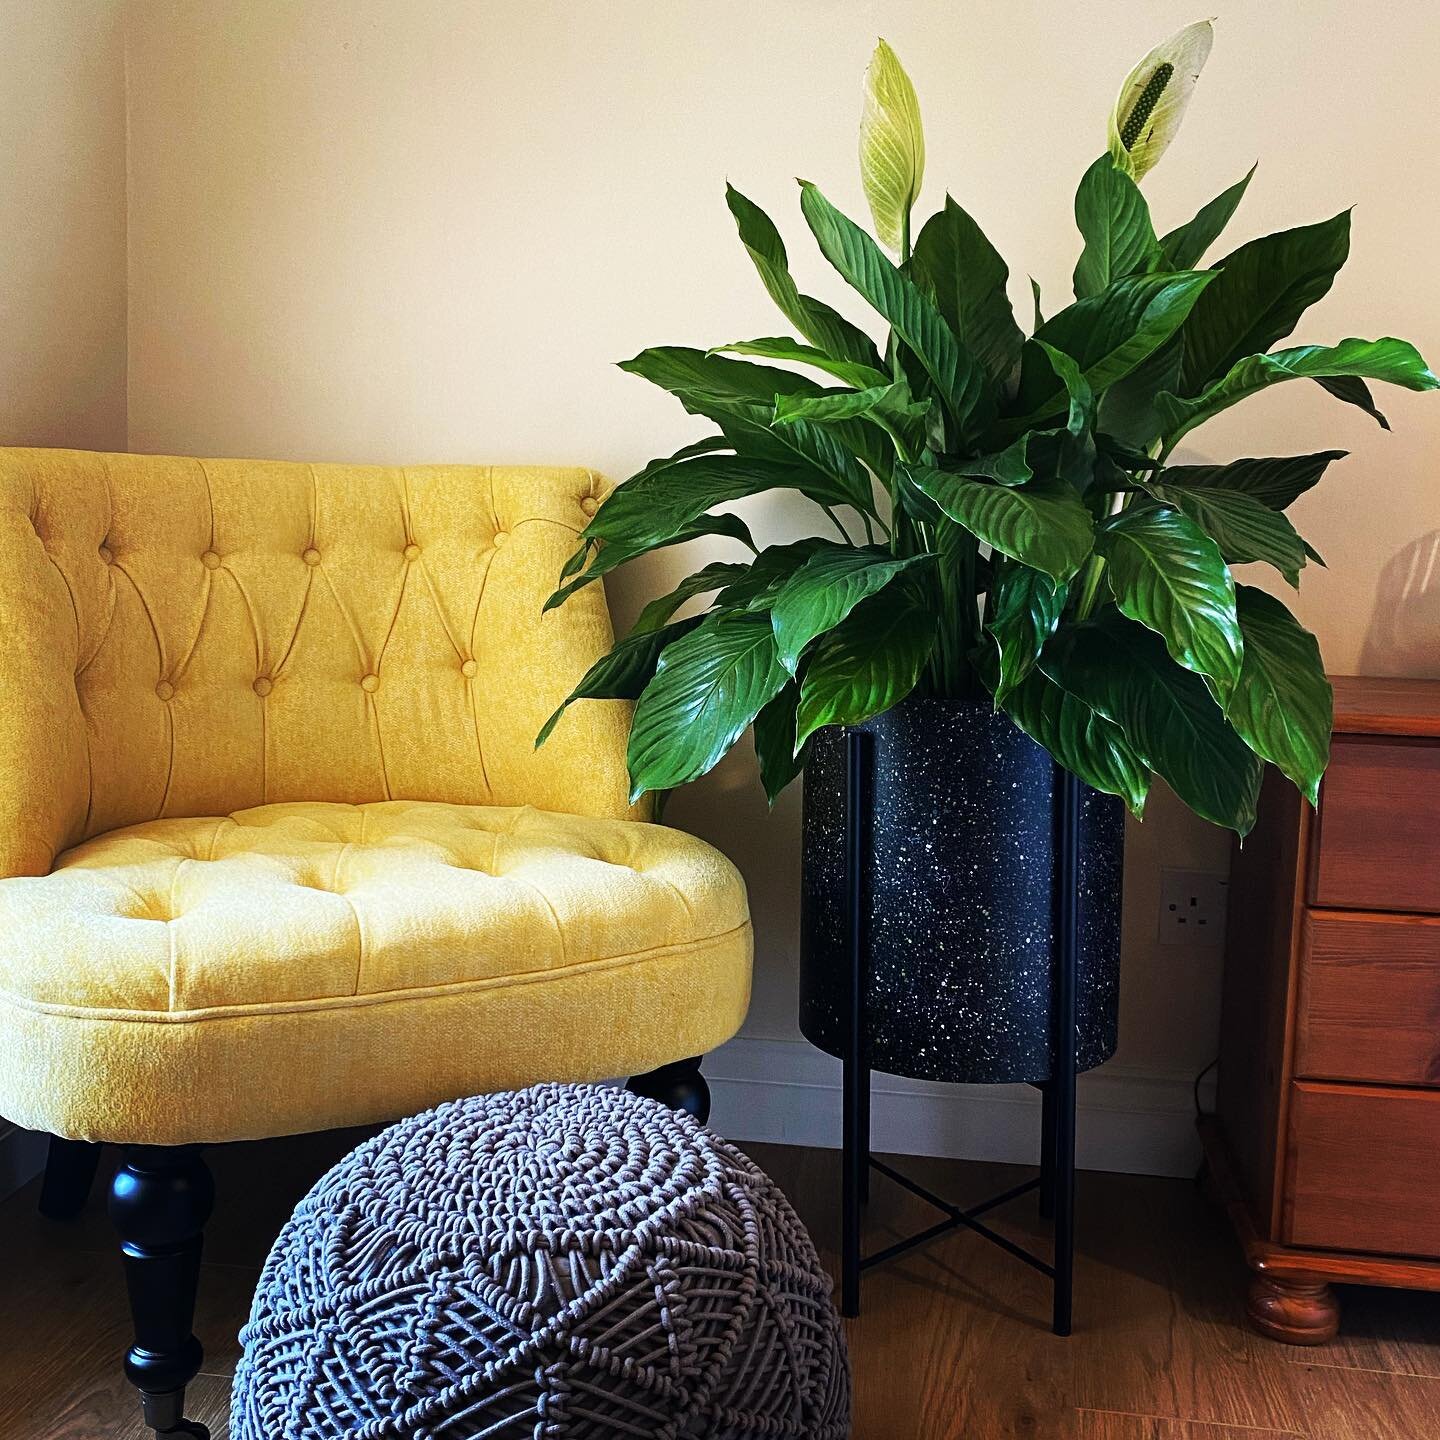 .
P E R C Y  T H E  P I E C E  L I L Y
.
We love a house plant, our first and biggest in the cottages is Percy. It was Love at first sight we just had to have him so he came home with us and now lives pride of place in the sun room of the Middleton c